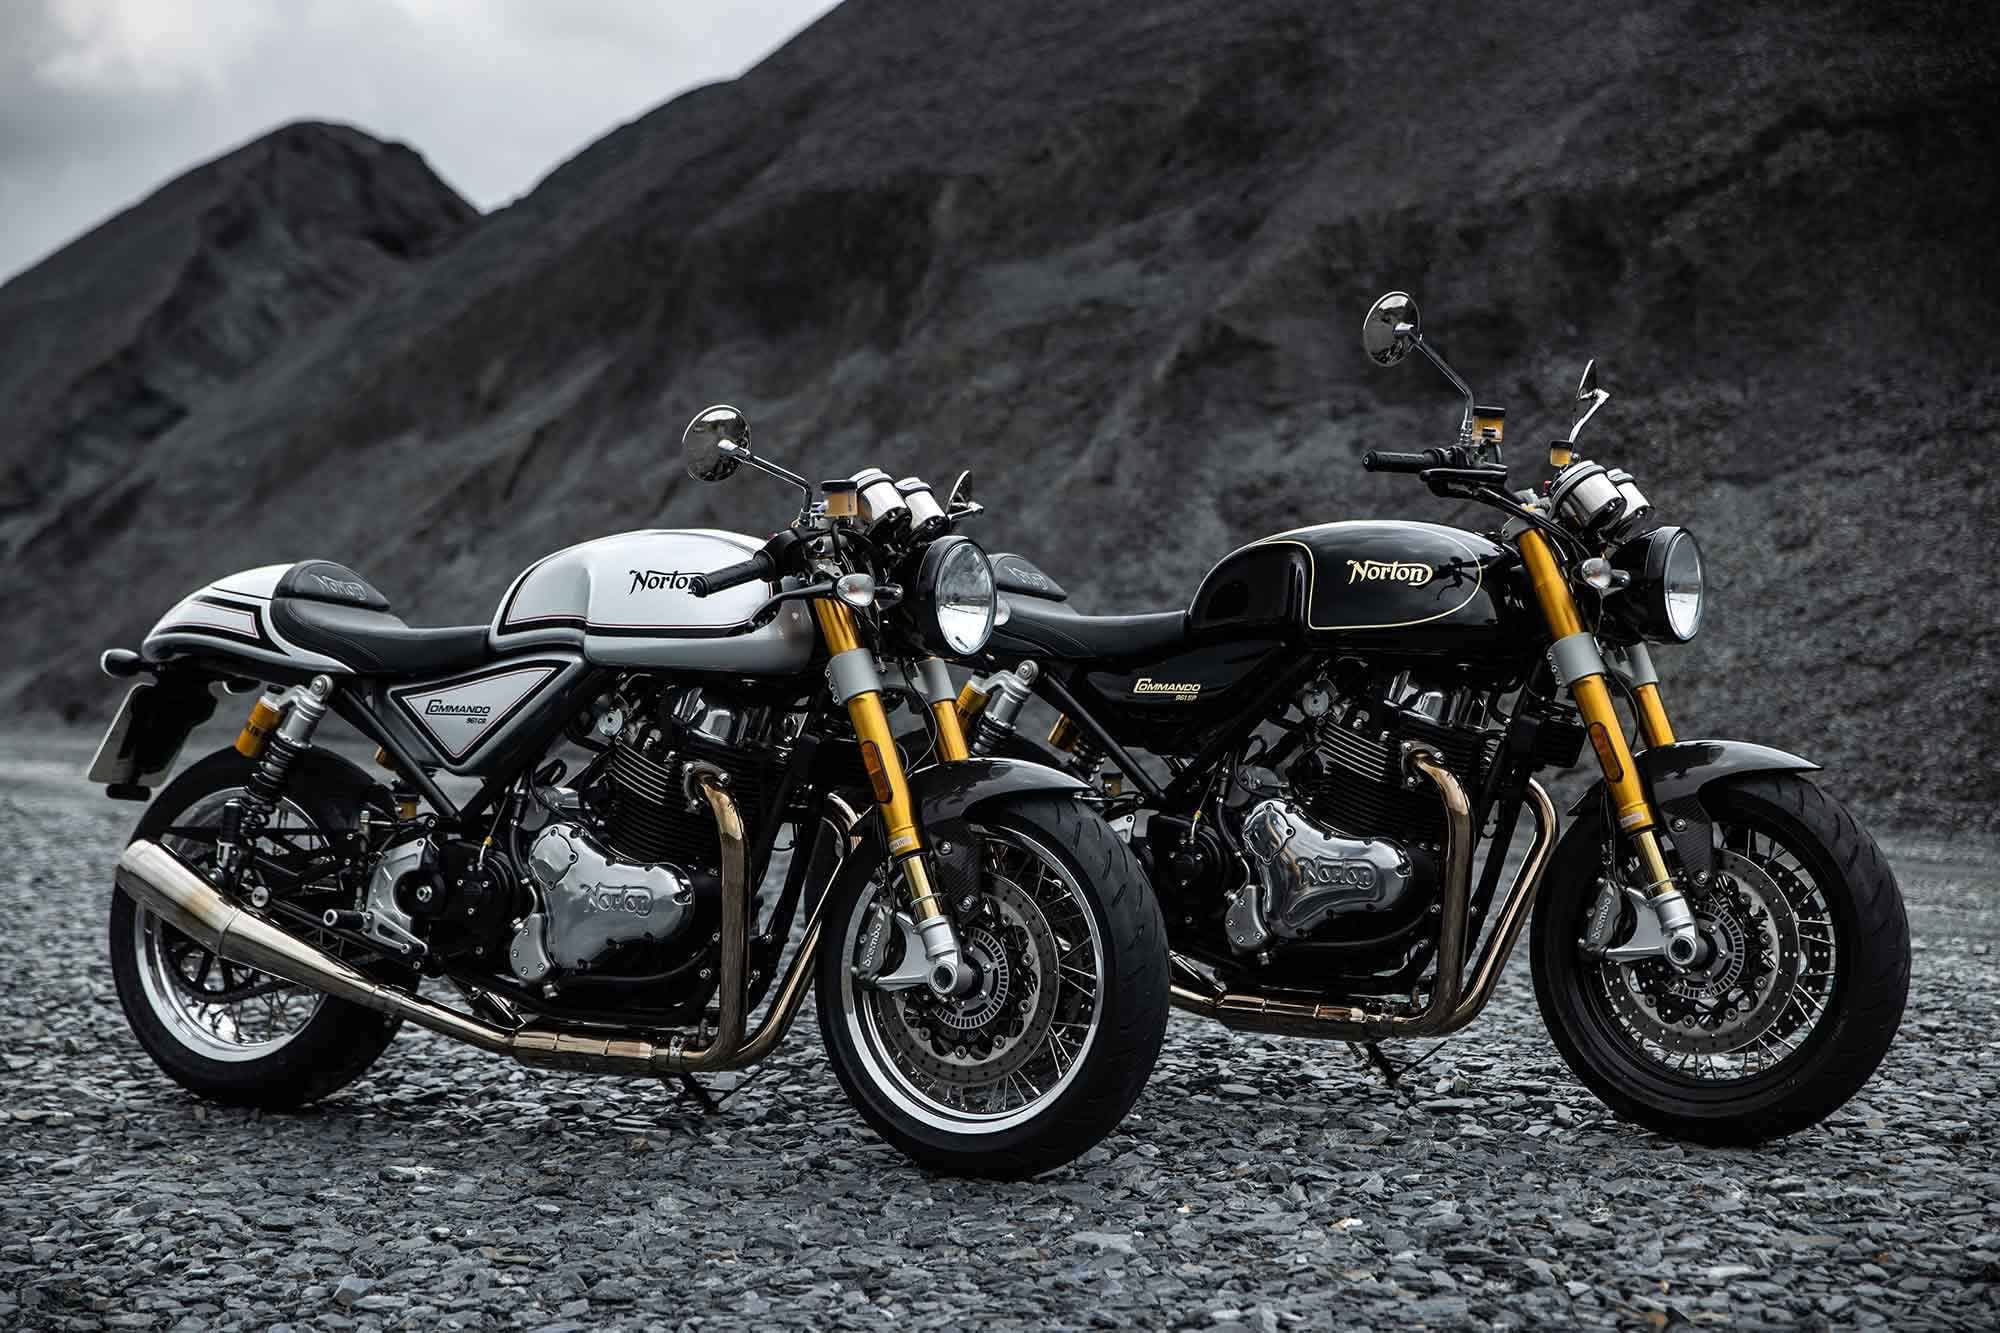 There are two models to choose from: the SP (Sport) and CR (Café Racer), with the only difference being the bars.